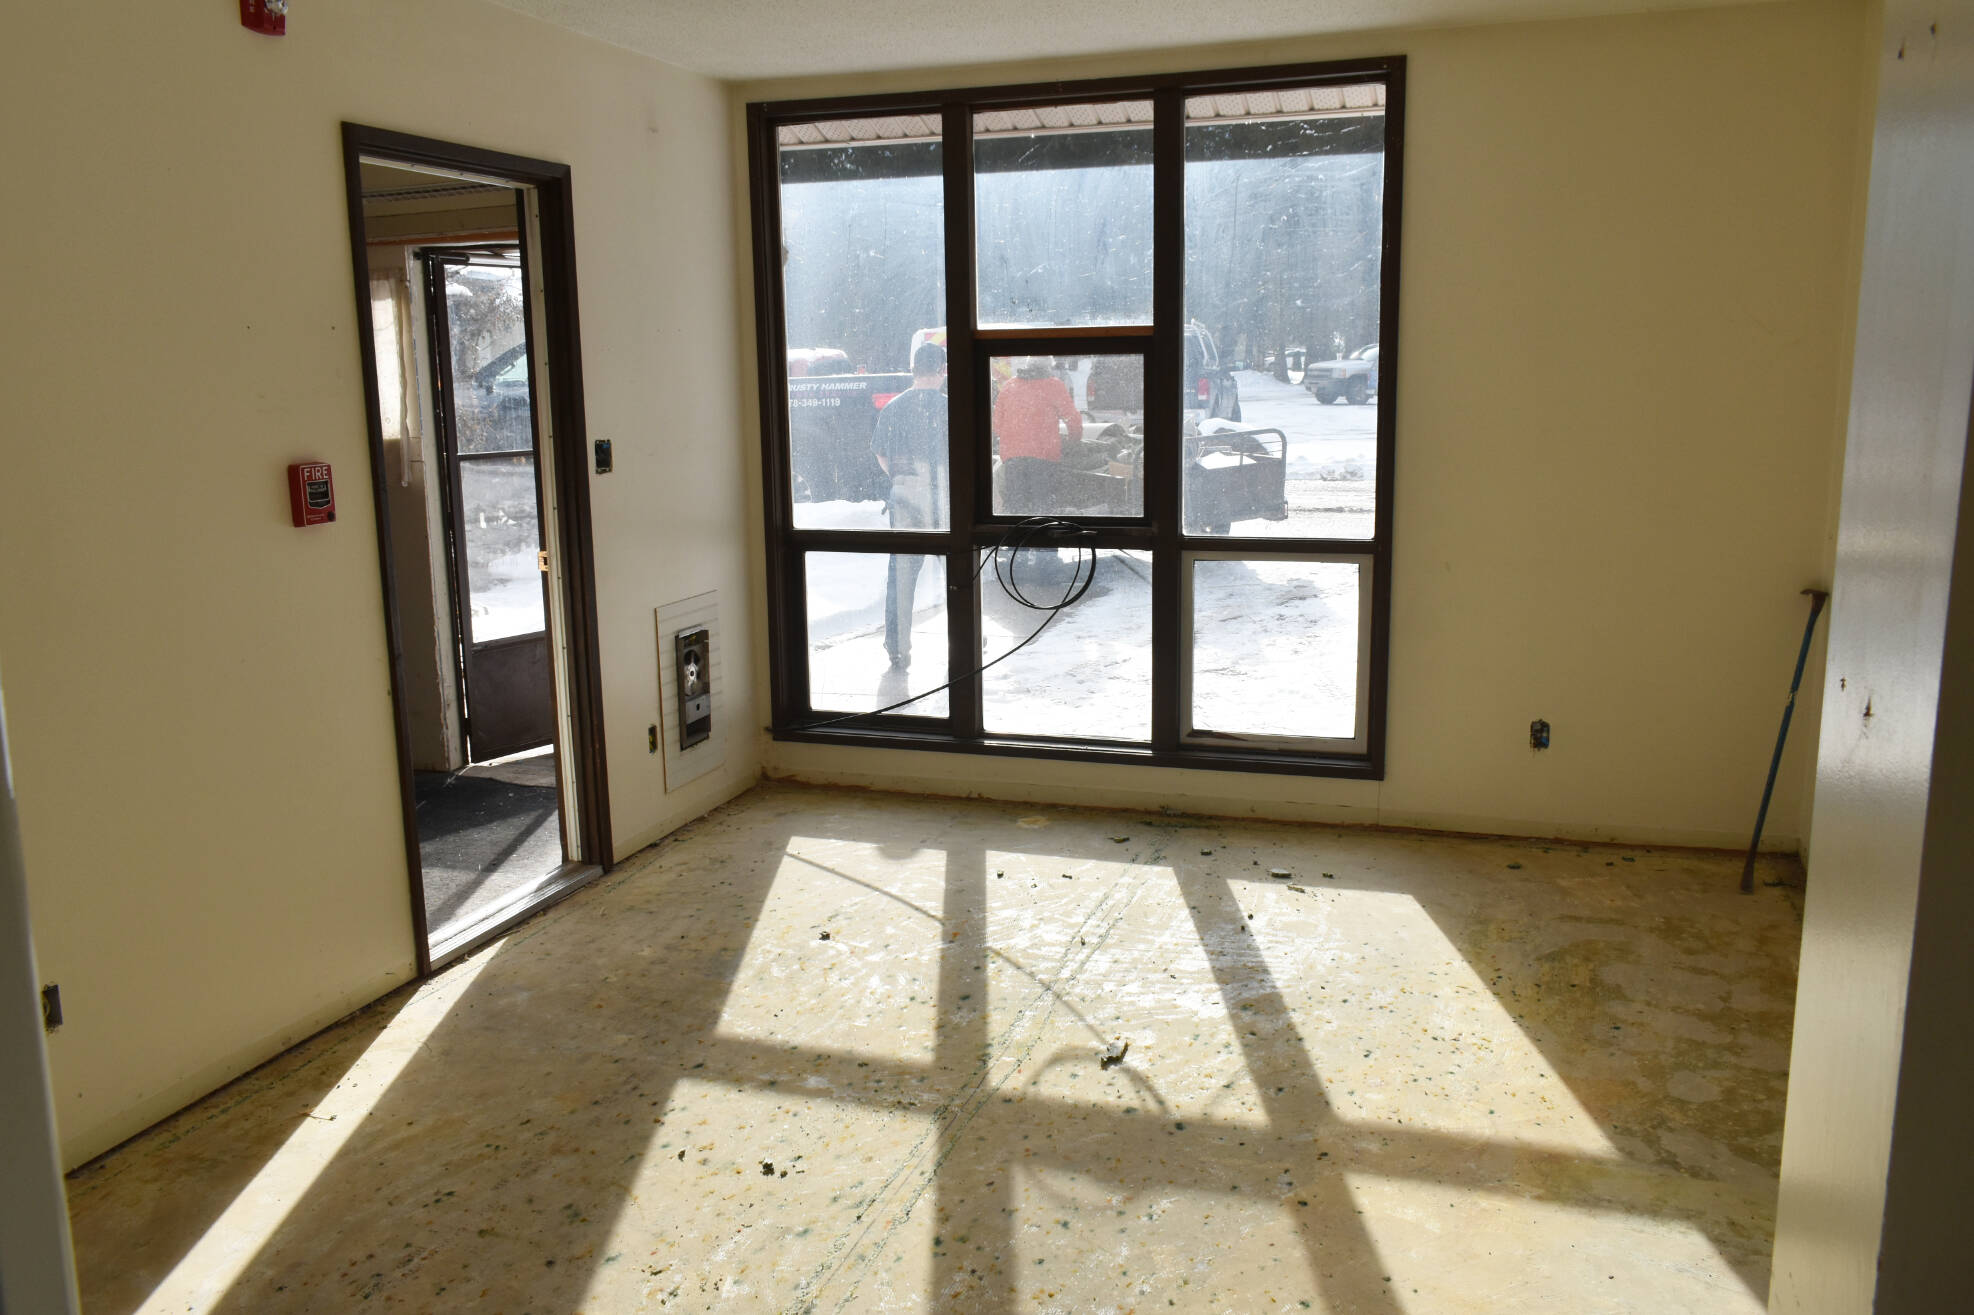 The freshly stripped unit at The Haven seniors’ living complex in Sicamous after carpet and baseboards were torn out by Eagle Valley Road Rescue volunteers, preparing for fresh paint and flooring and a new occupant, Saturday, Feb. 4, 2023. (Rebecca Willson- Eagle Valley News)